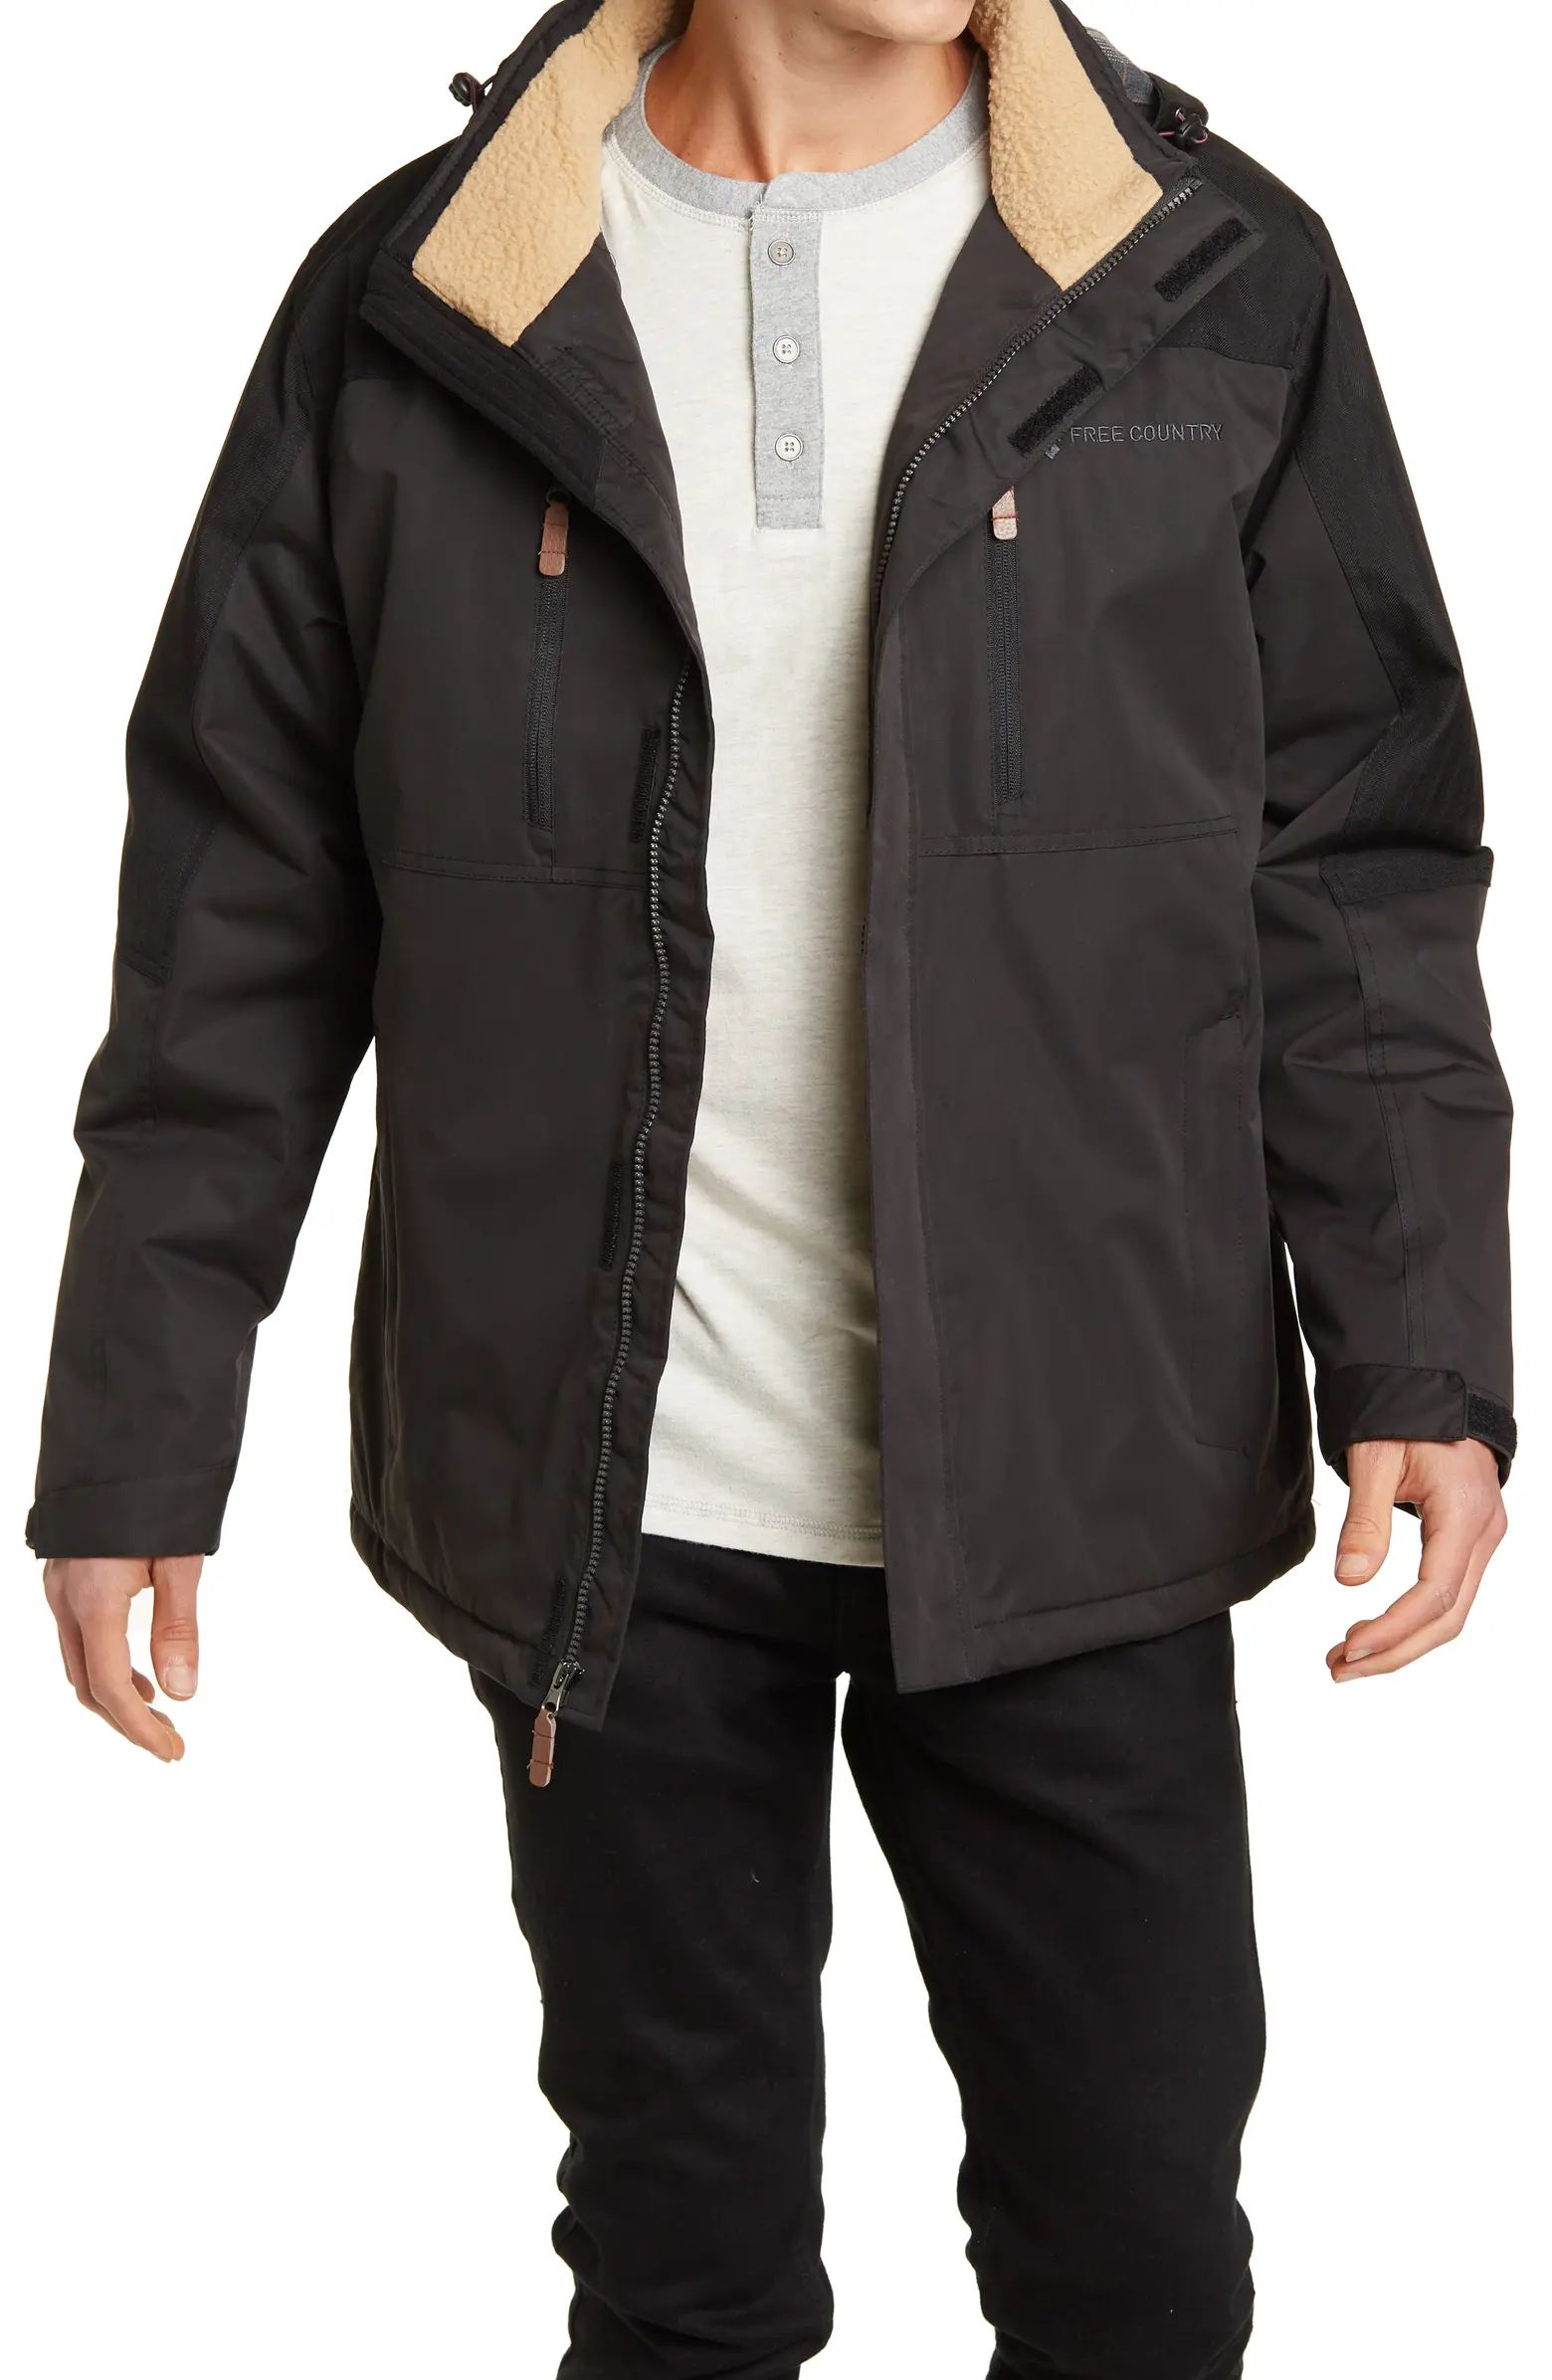 FREE COUNTRY Hooded Faux Shearling Lined Jacket | Nordstromrack | Nordstrom Rack